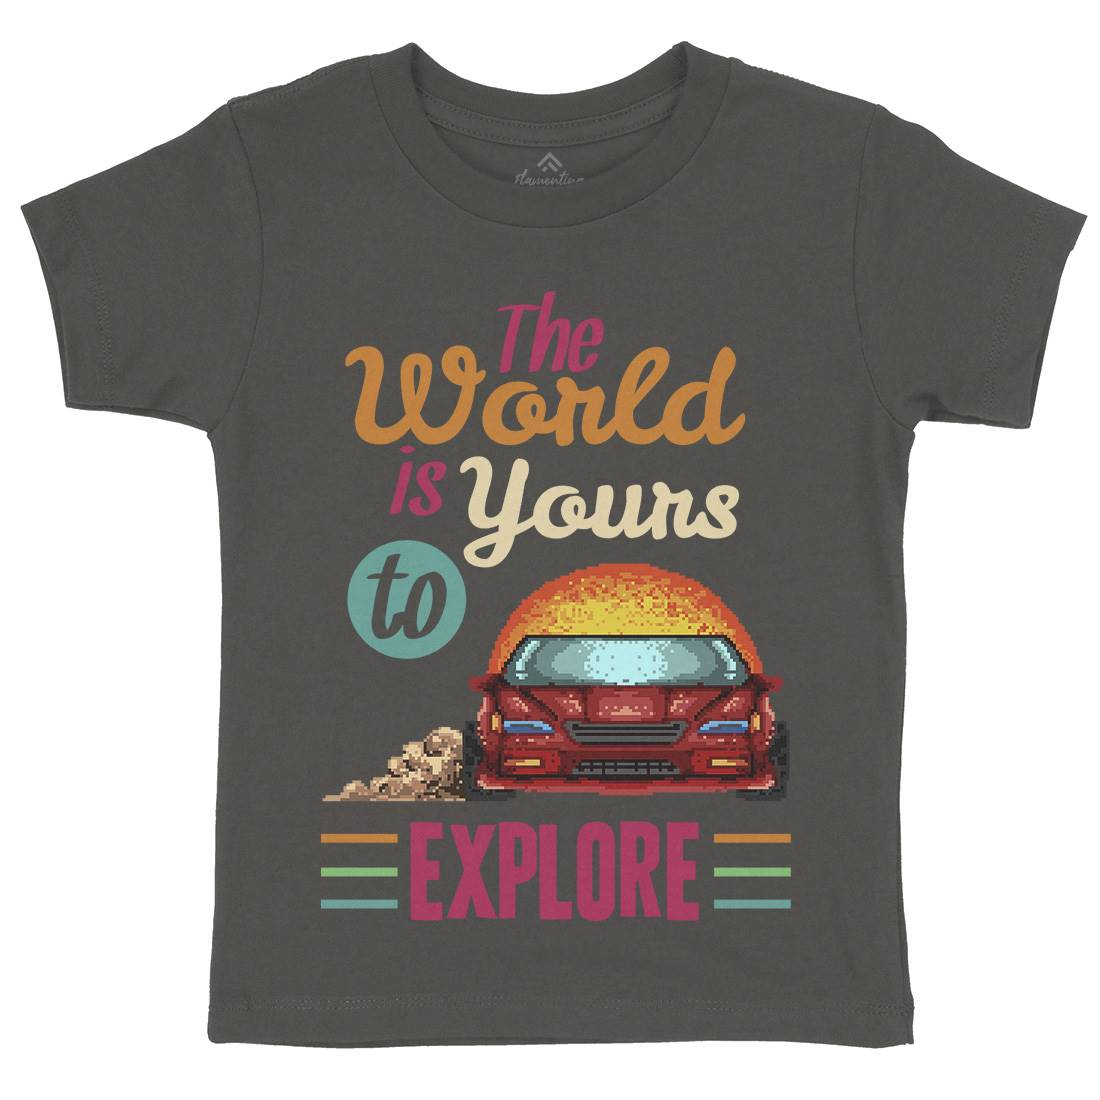 The World Is Yours To Explore Kids Crew Neck T-Shirt Cars B970